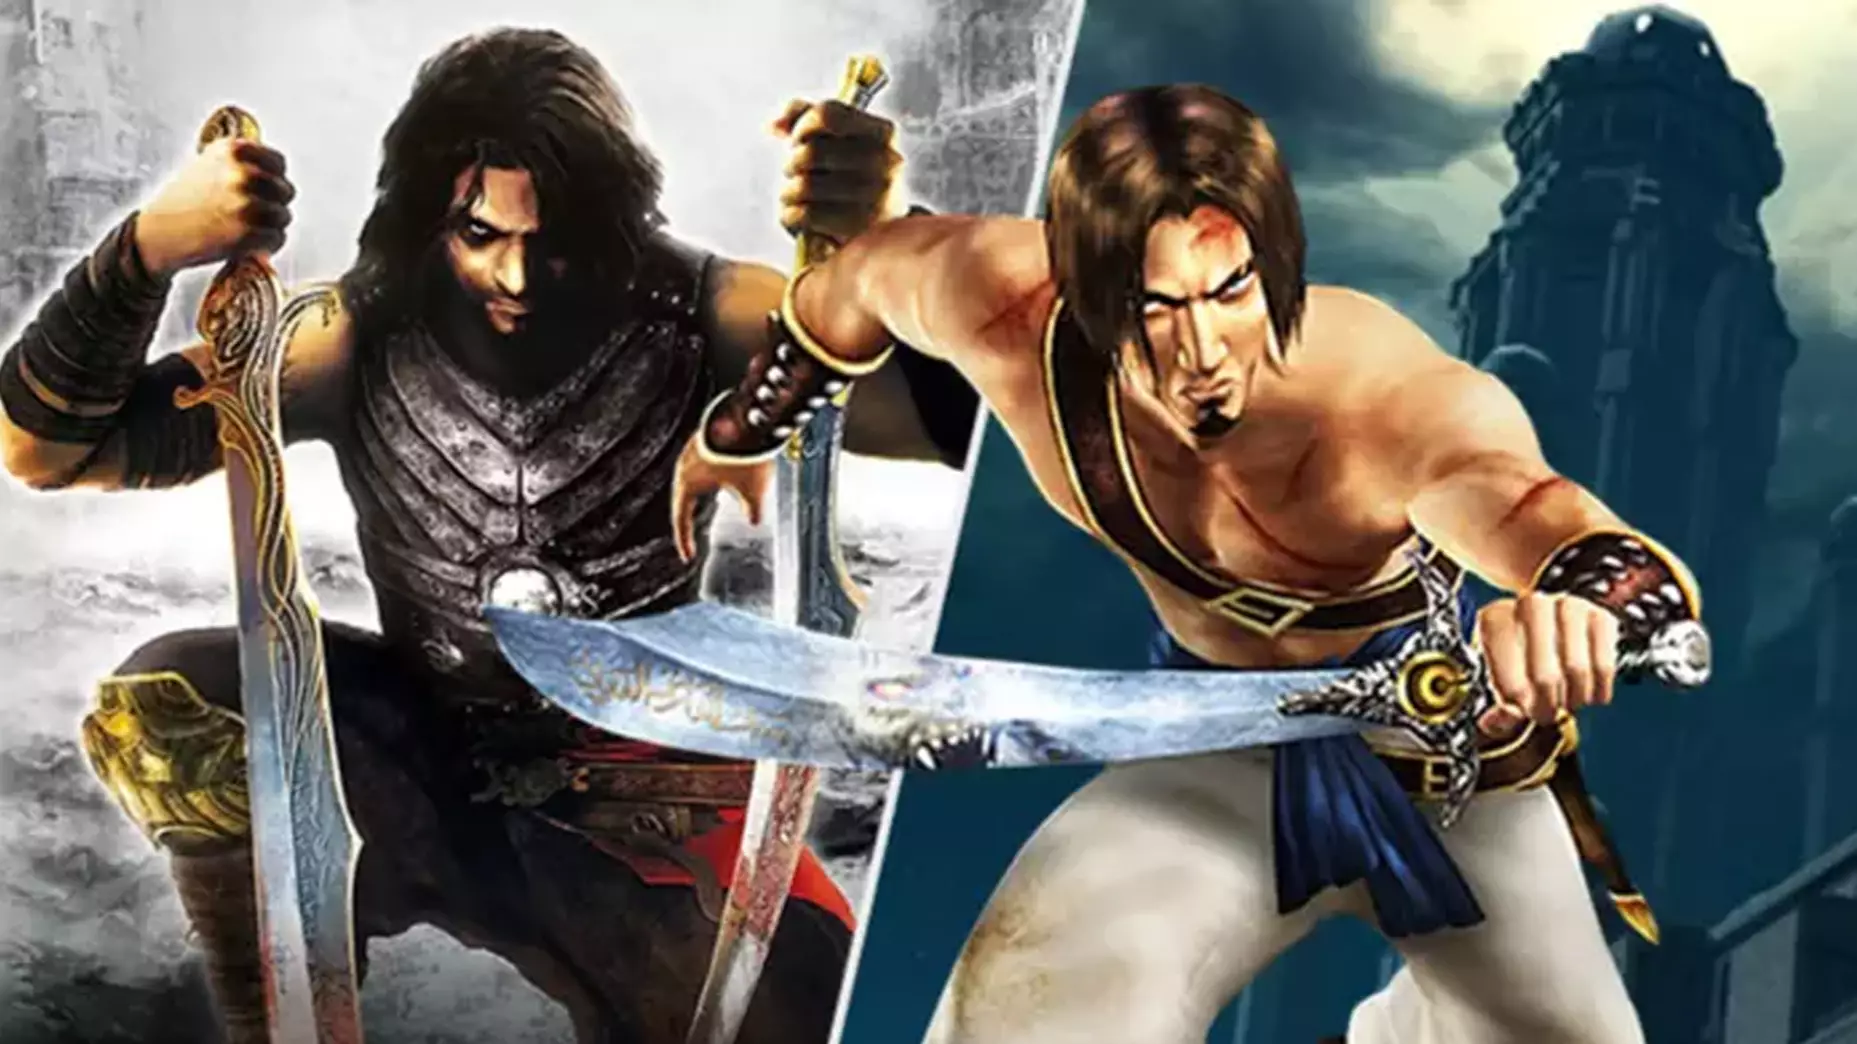 Prince Of Persia Remake To Be Revealed This Week, Insiders Claim